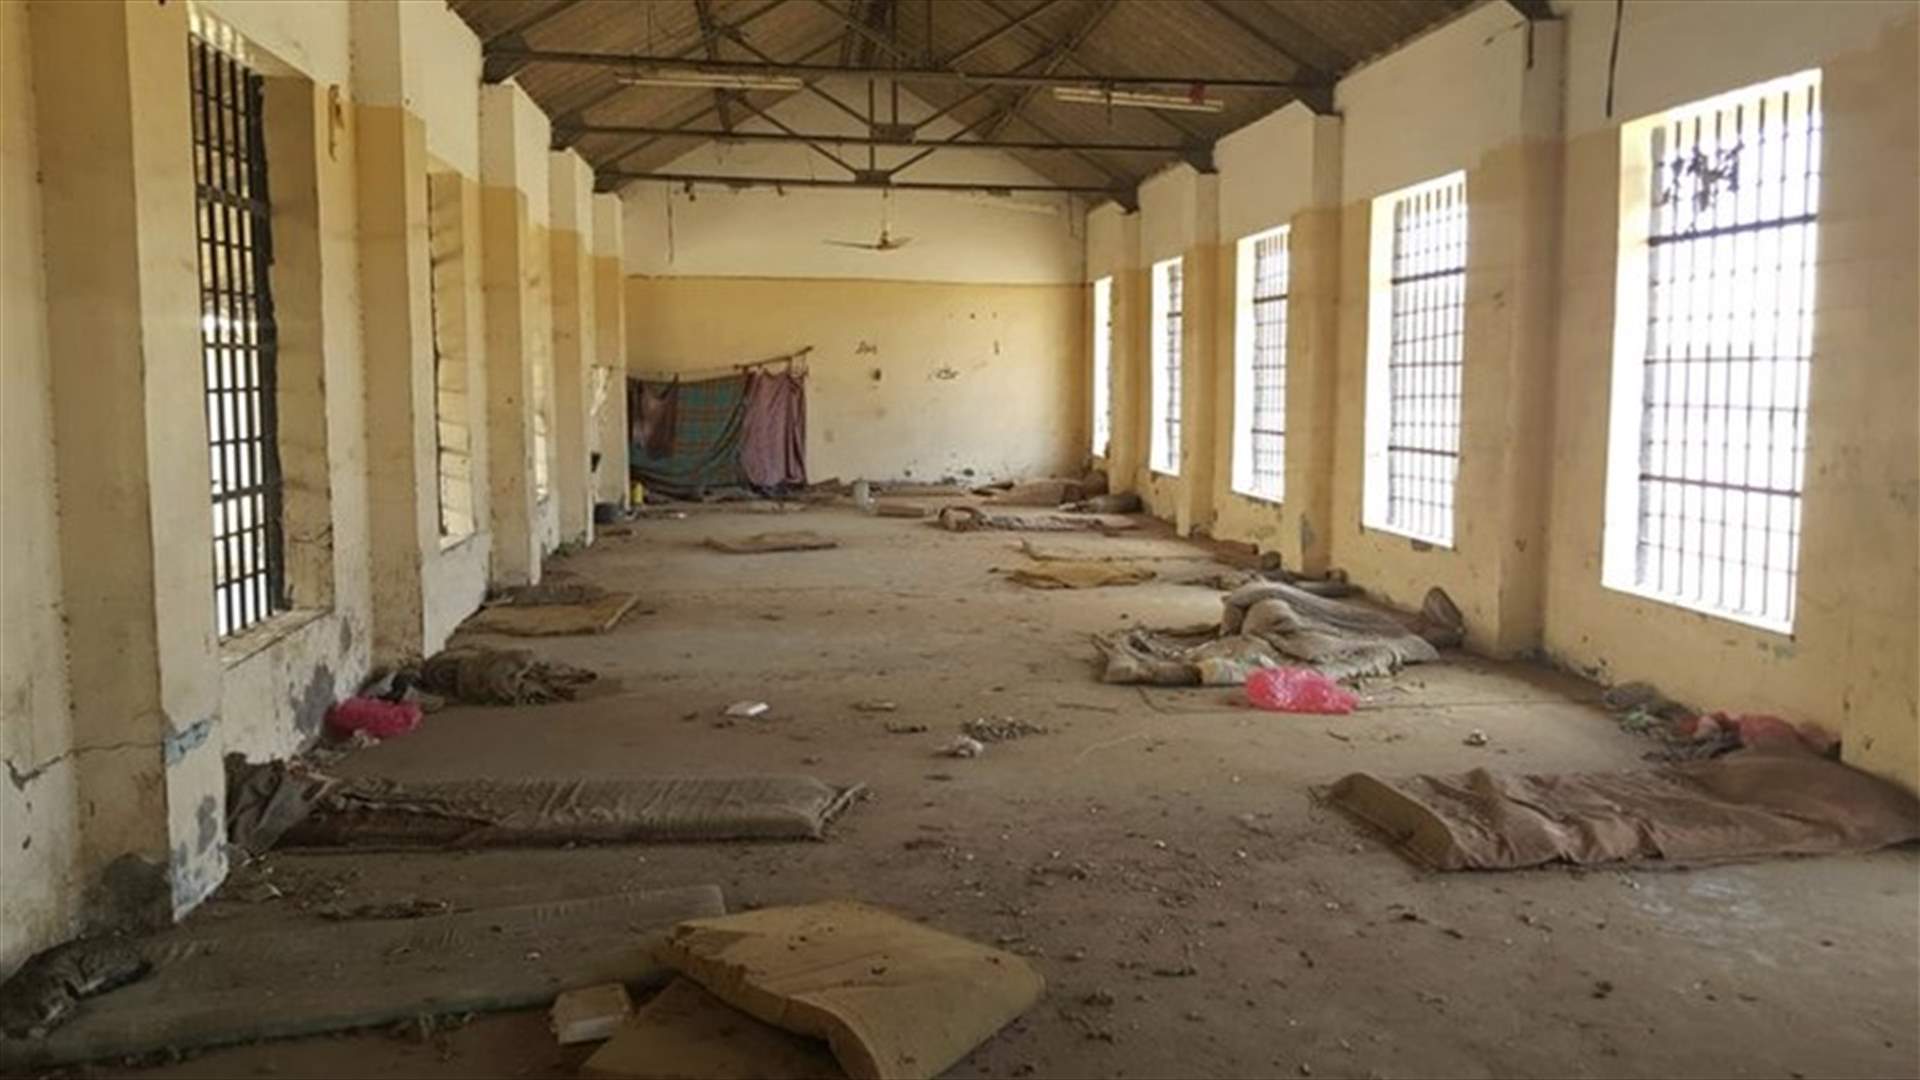 Yemen government says to investigate allegations of abuse in secret prisons